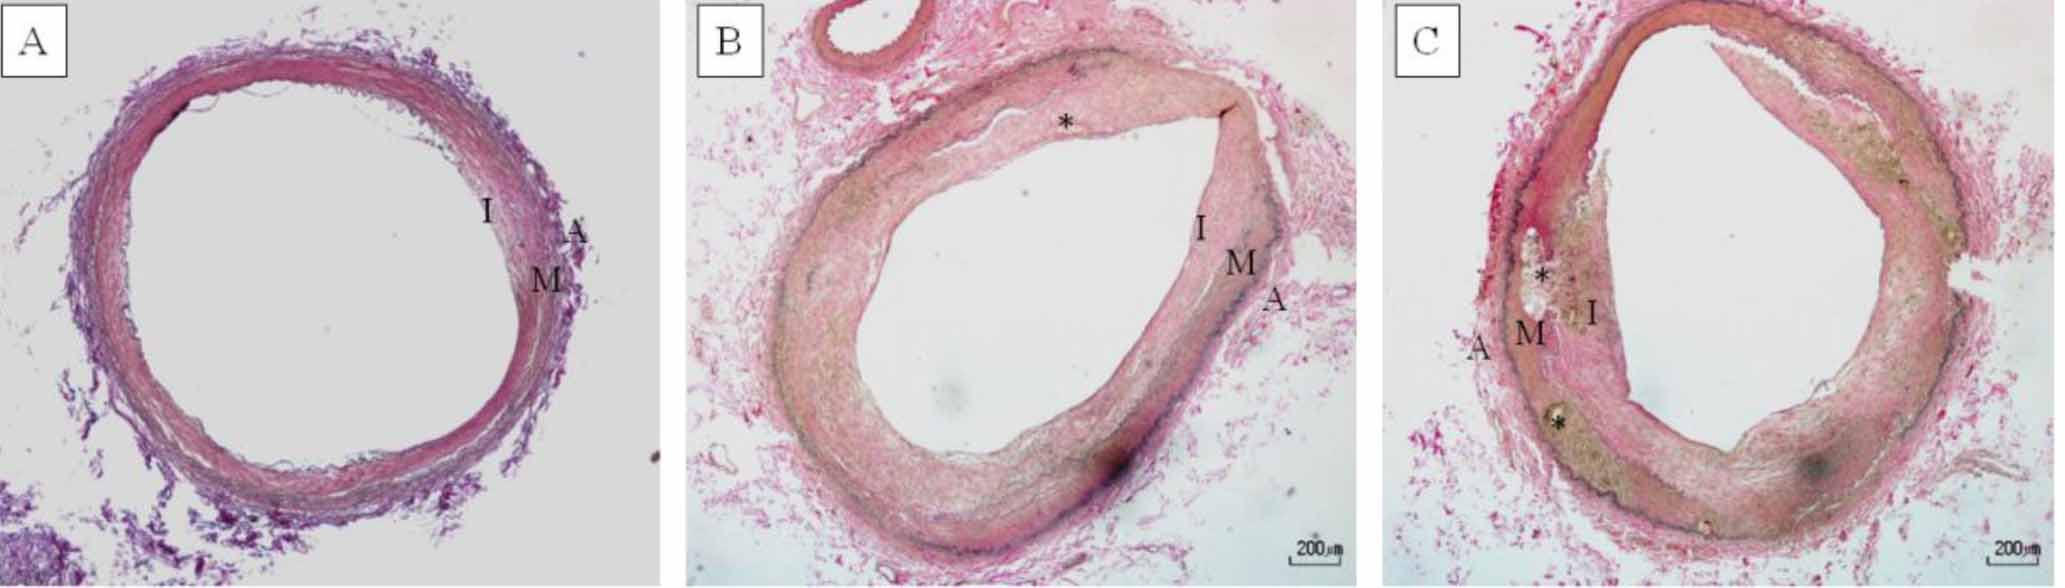 Histology of the common iliac artery stained with Verhoeff van Gieson (VVG) of a monyet of peripheral artery disease (PAD).